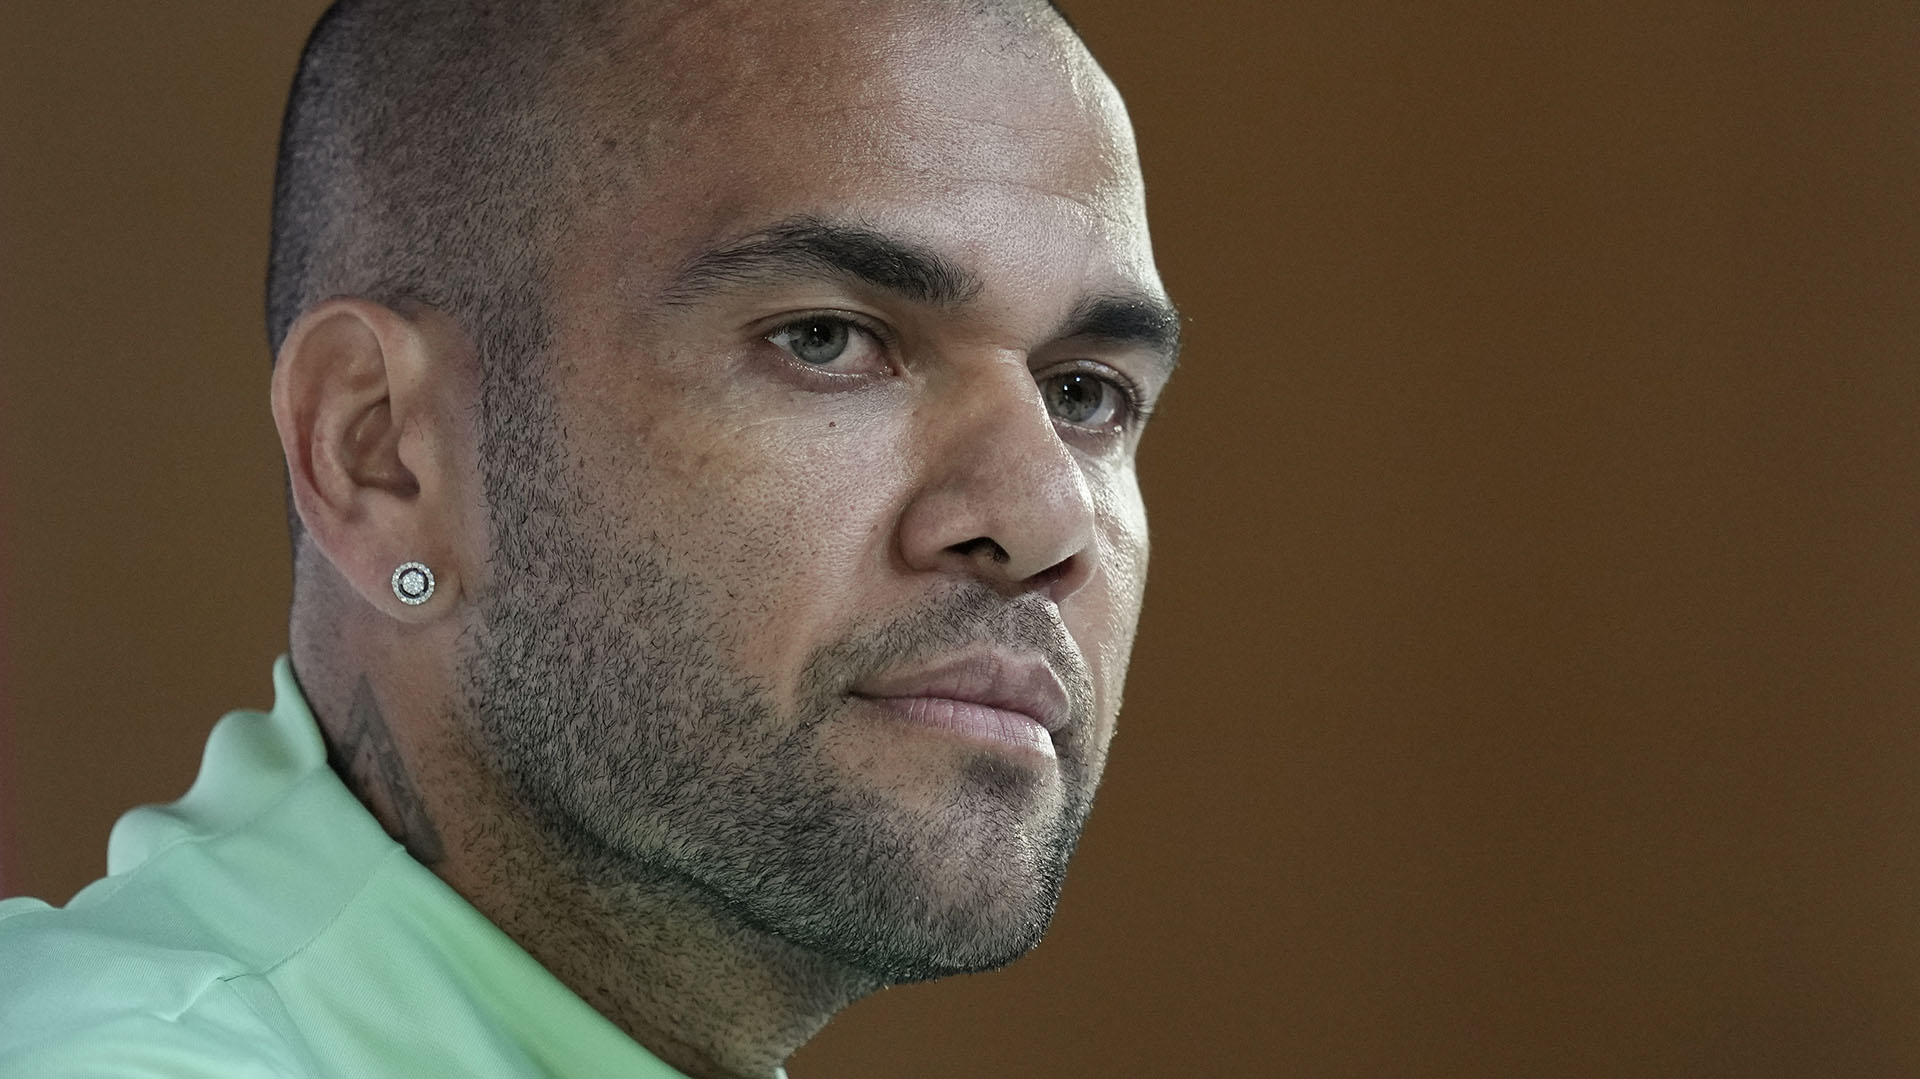 Dani Alves' group of lawyers is studying a strategy for him to be provisionally released during the case (AP)